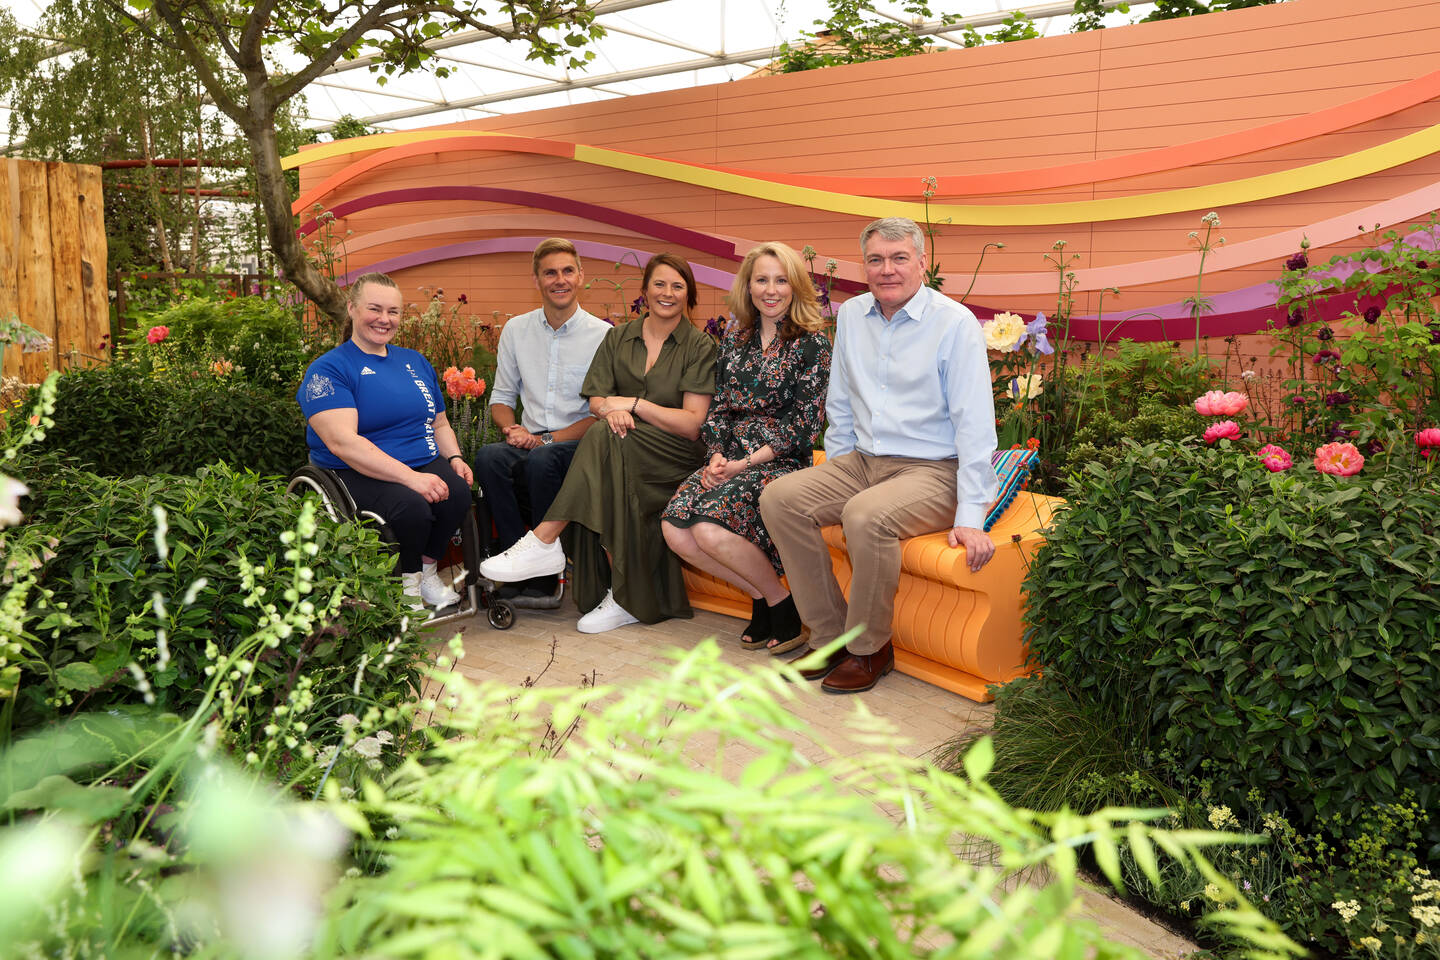 A group of people sit in a garden. They are from left to right Louise Sugden, Steve Brown, Liz Johnson, Penelope Walker and Ashley Iceton.